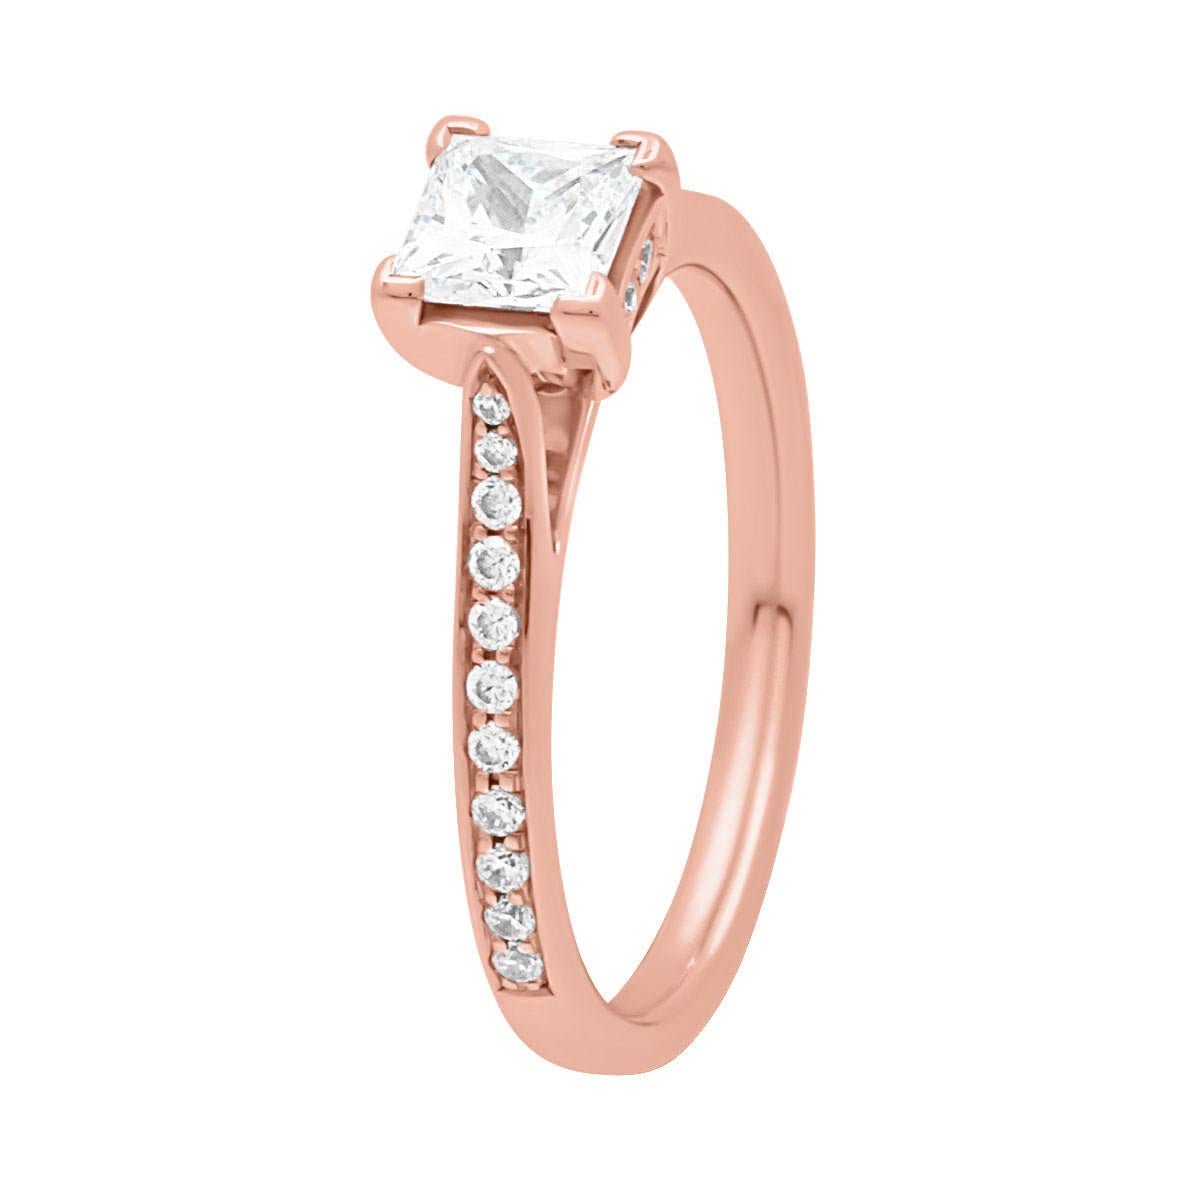 Chevron Claw Engagement Ring made of rose gold inan angled position